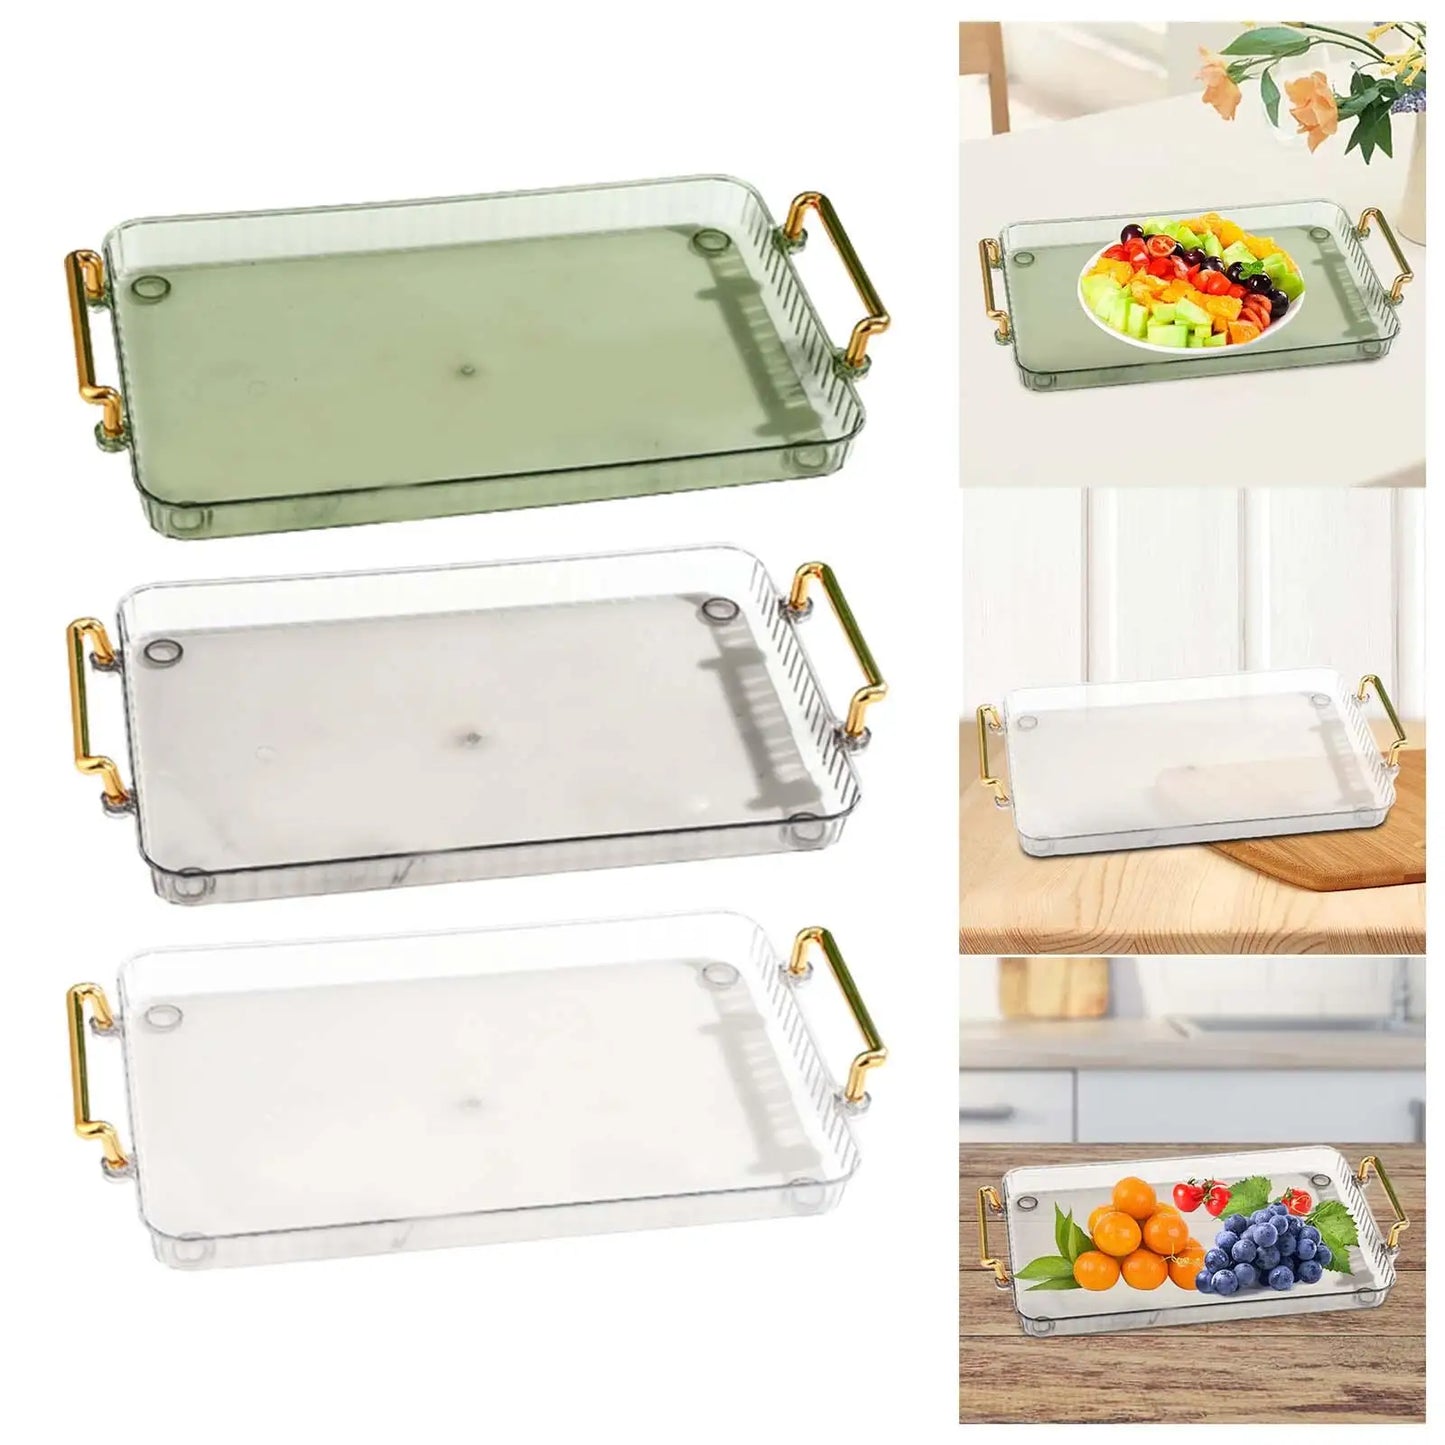 Modern Decorative Tray (Breakfast, Bed, Perfume, Makeup, Pastries)